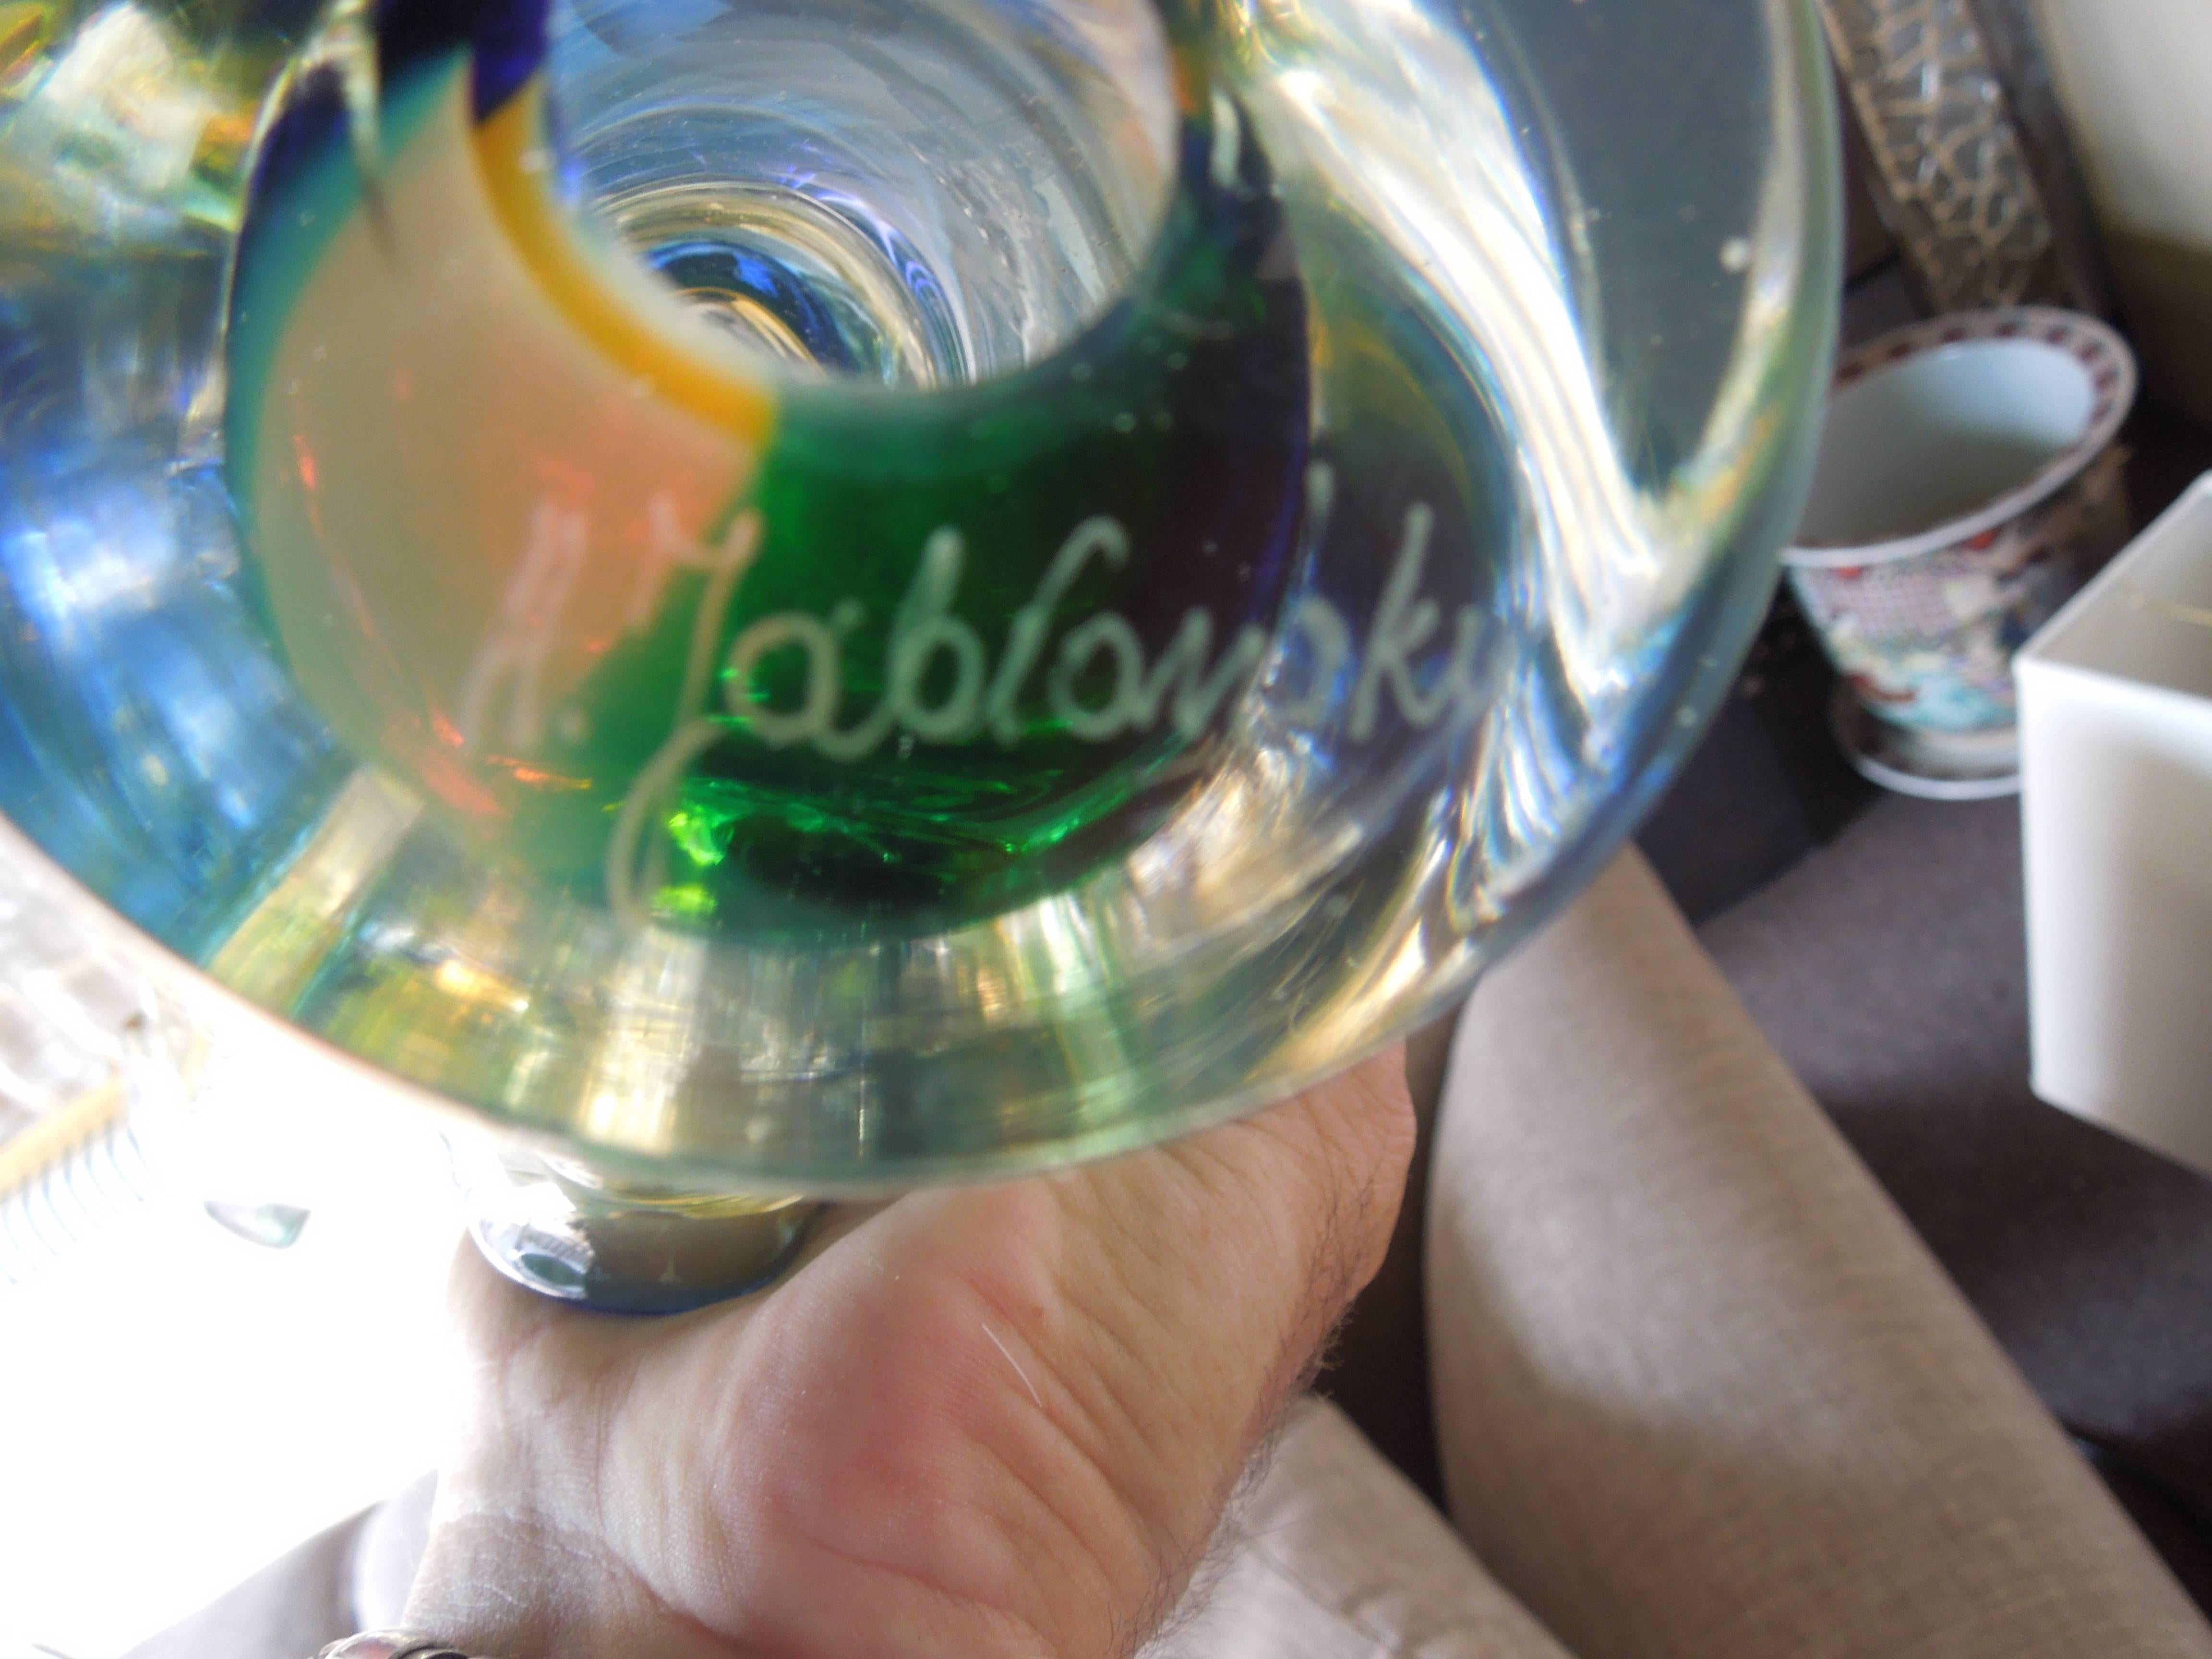 This is a gorgeous piece of hand blown glass signed by the artist, A. Jablanski. The colors of green, amber and blue combined are stunning. From a multi-million dollar Indian Wells estate.